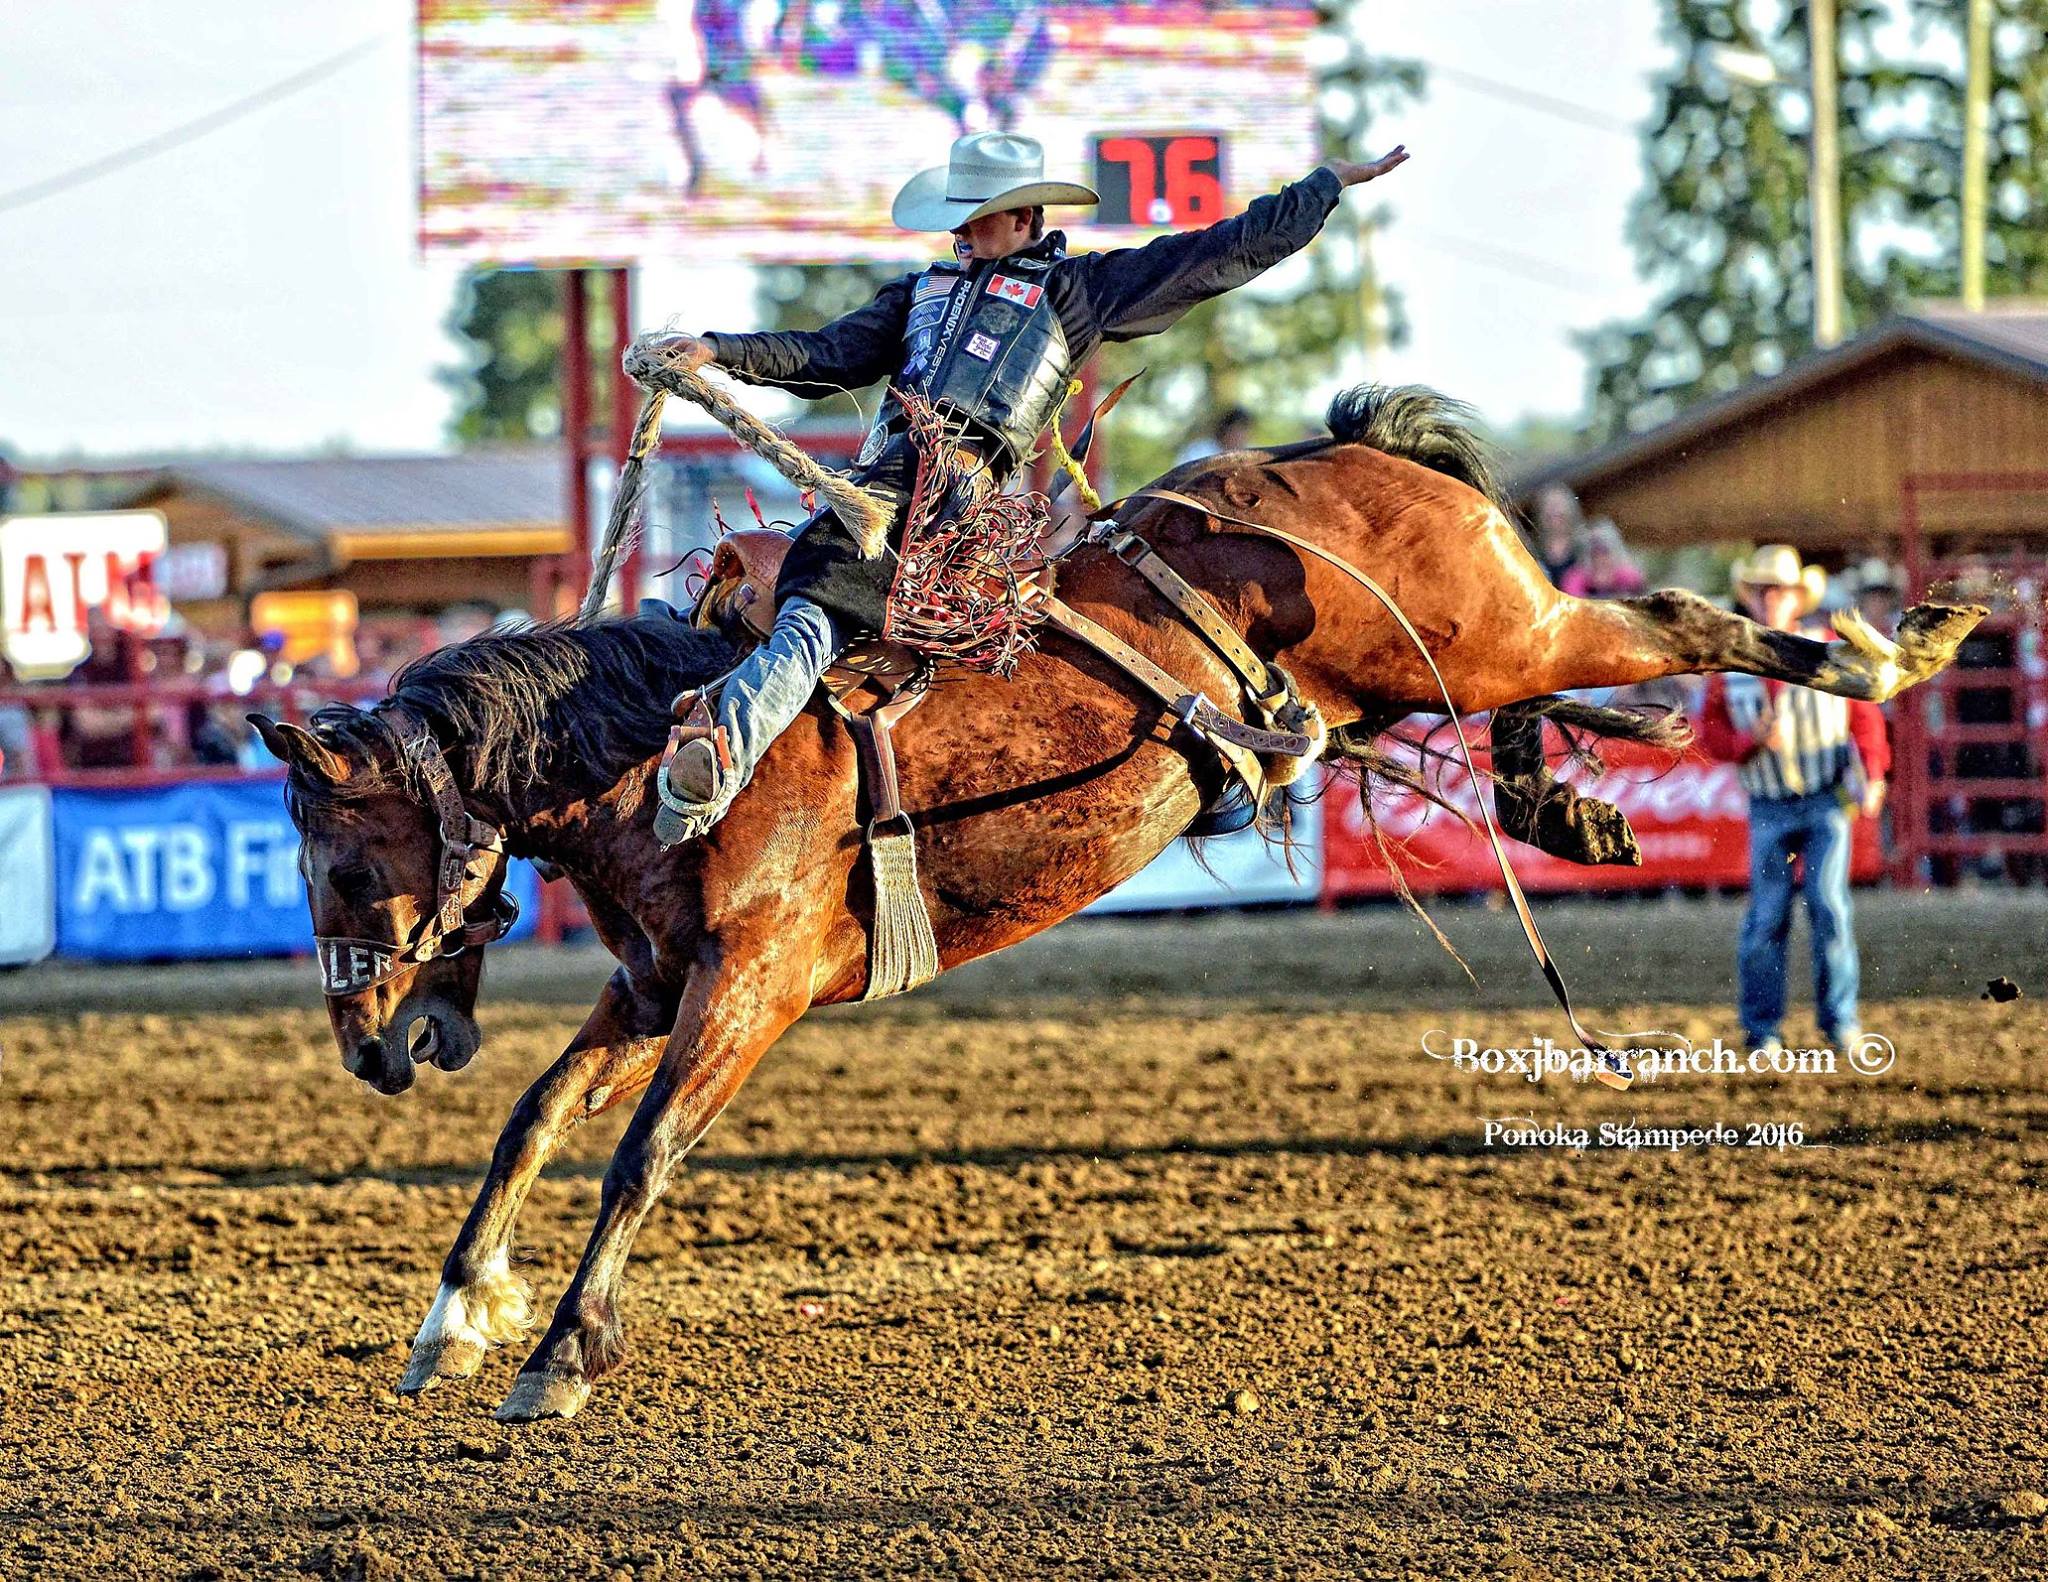 Guide to 2018 Rodeos Cowboy TrailExperience Cowboy Trail